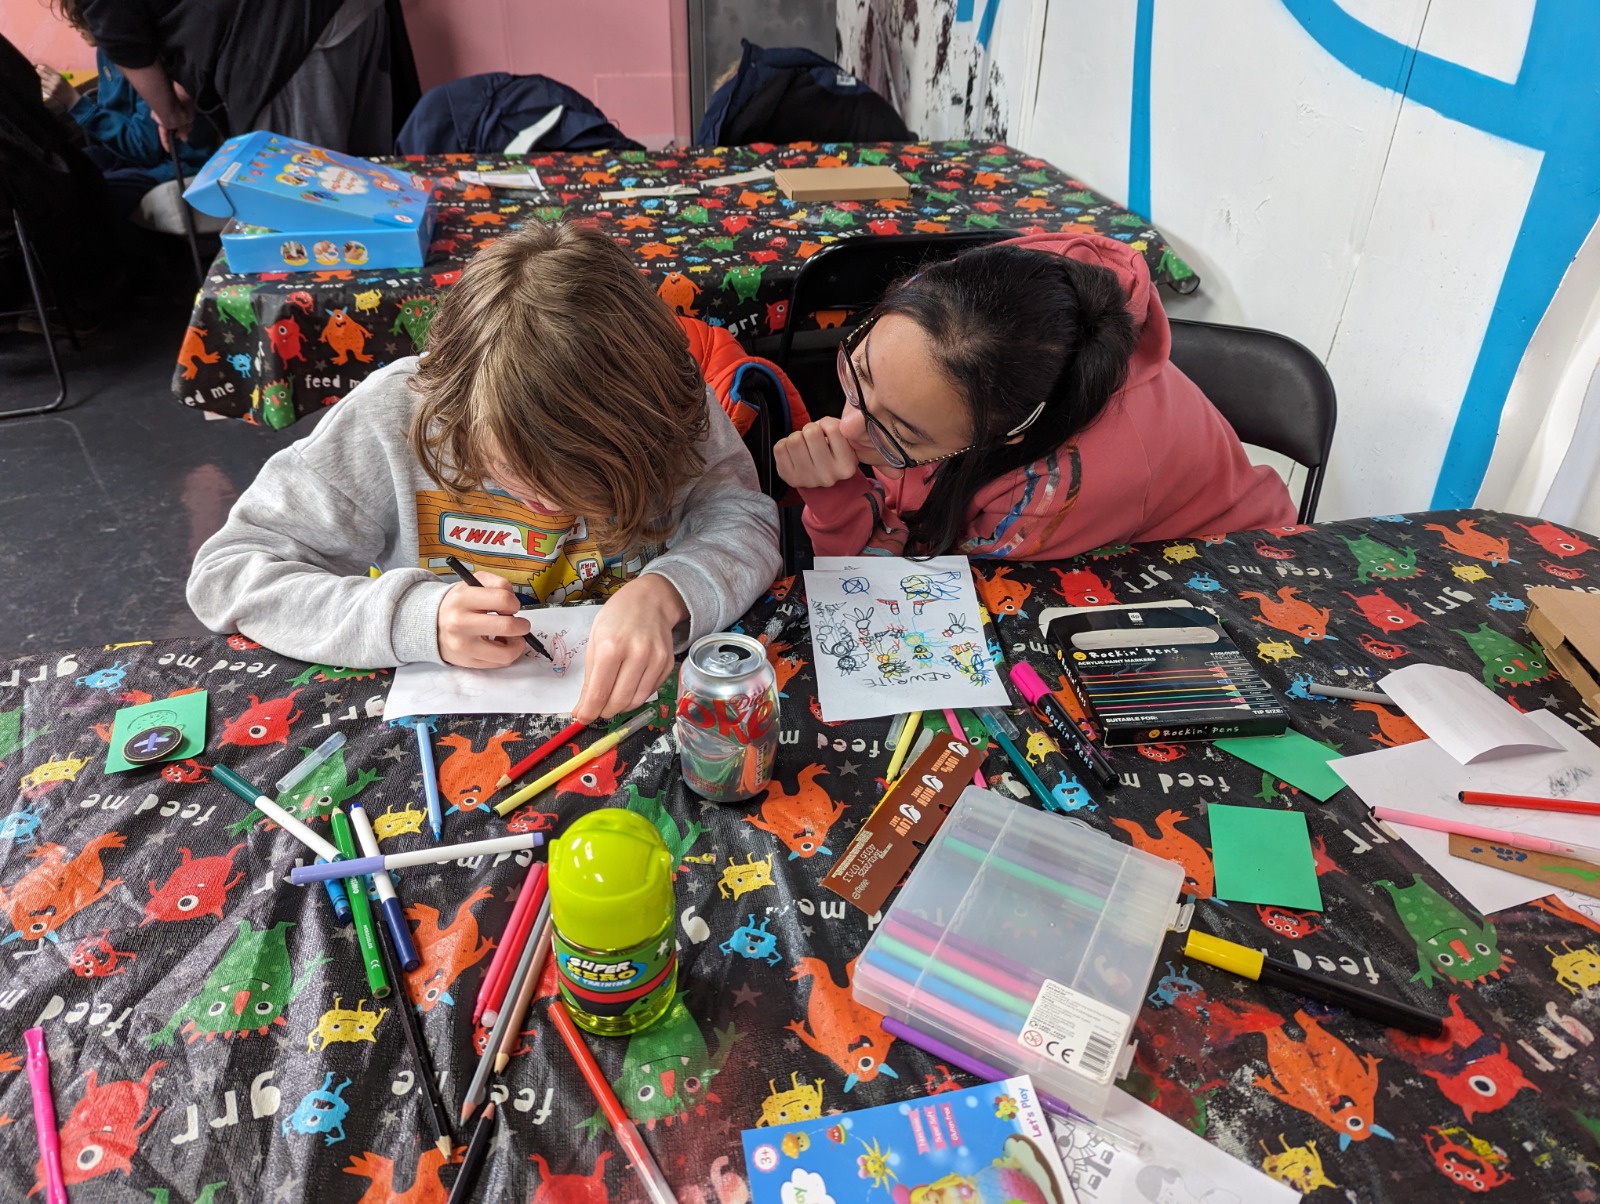 University student leans over young person drawing. The table cloth is brightly coloured with monsters and markers are spread out around the two.